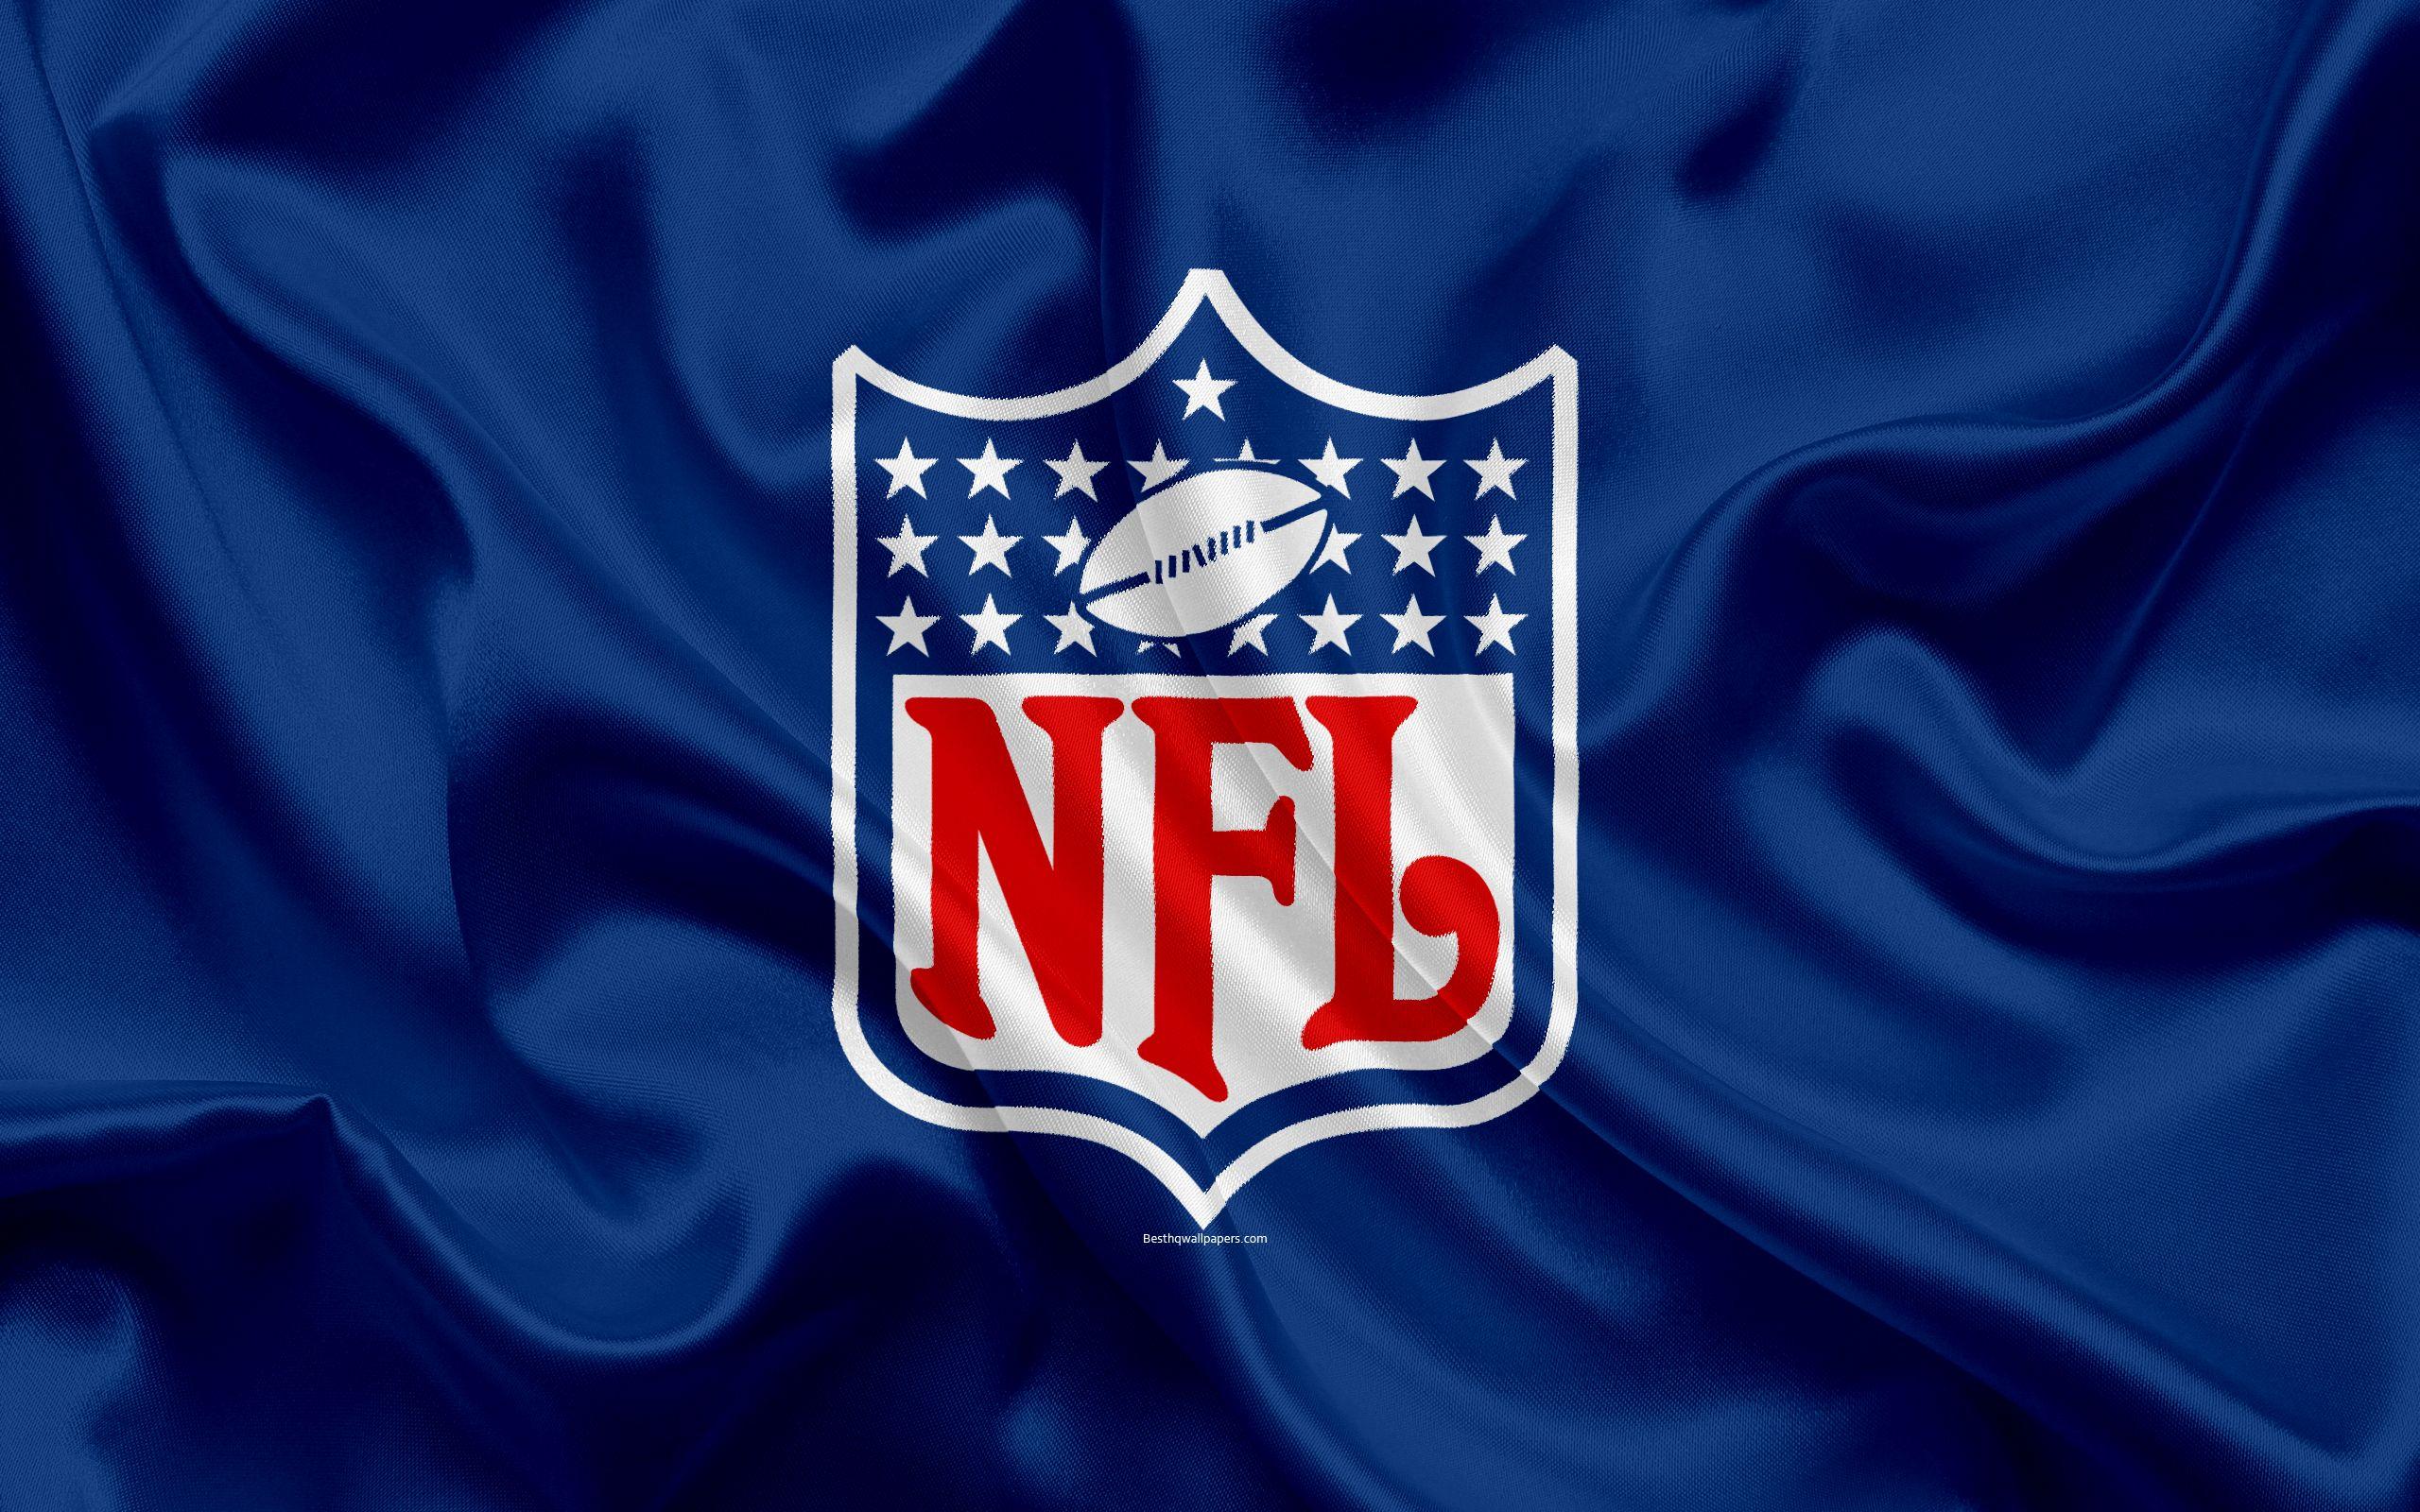 Nfl Logo Wallpapers Top Free Nfl Logo Backgrounds Wallpaperaccess